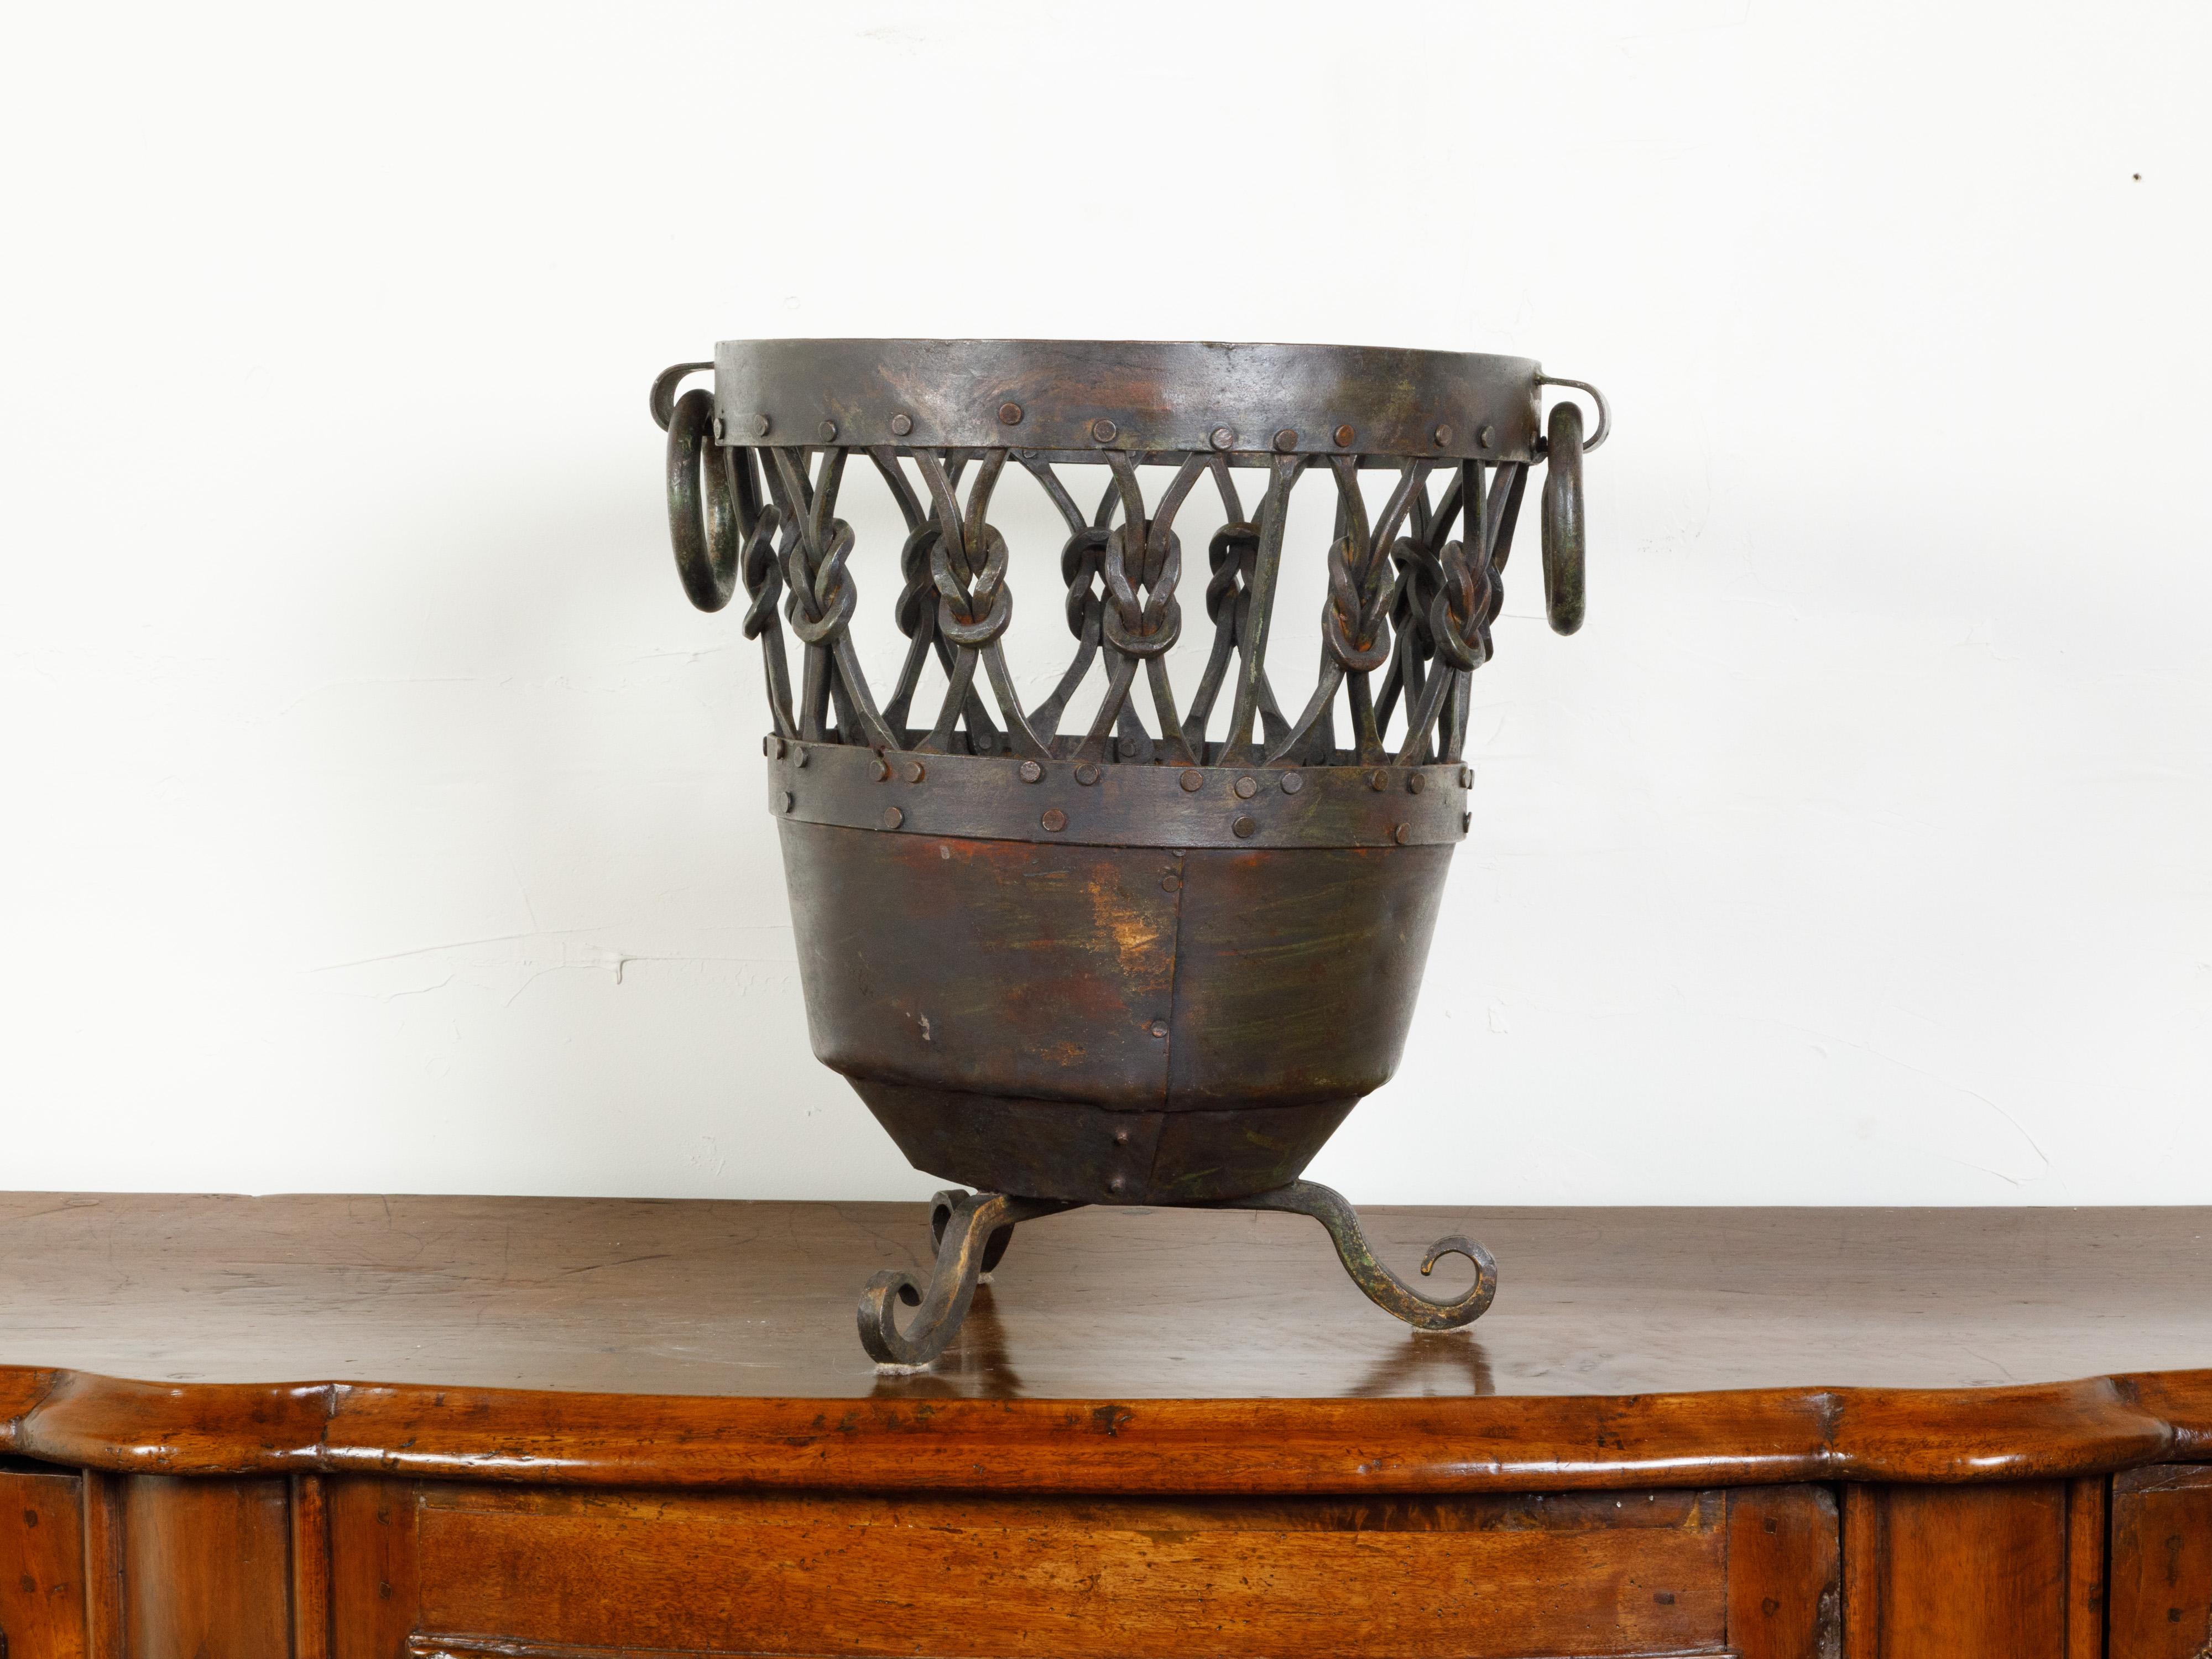 An English metal brazier /pot from the mid 20th century, with knotted motifs and scrolling feet. Created in England during the midcentury period, this metal brazier features a circular top with pierced knotted motifs, flanked with large ring pulls.